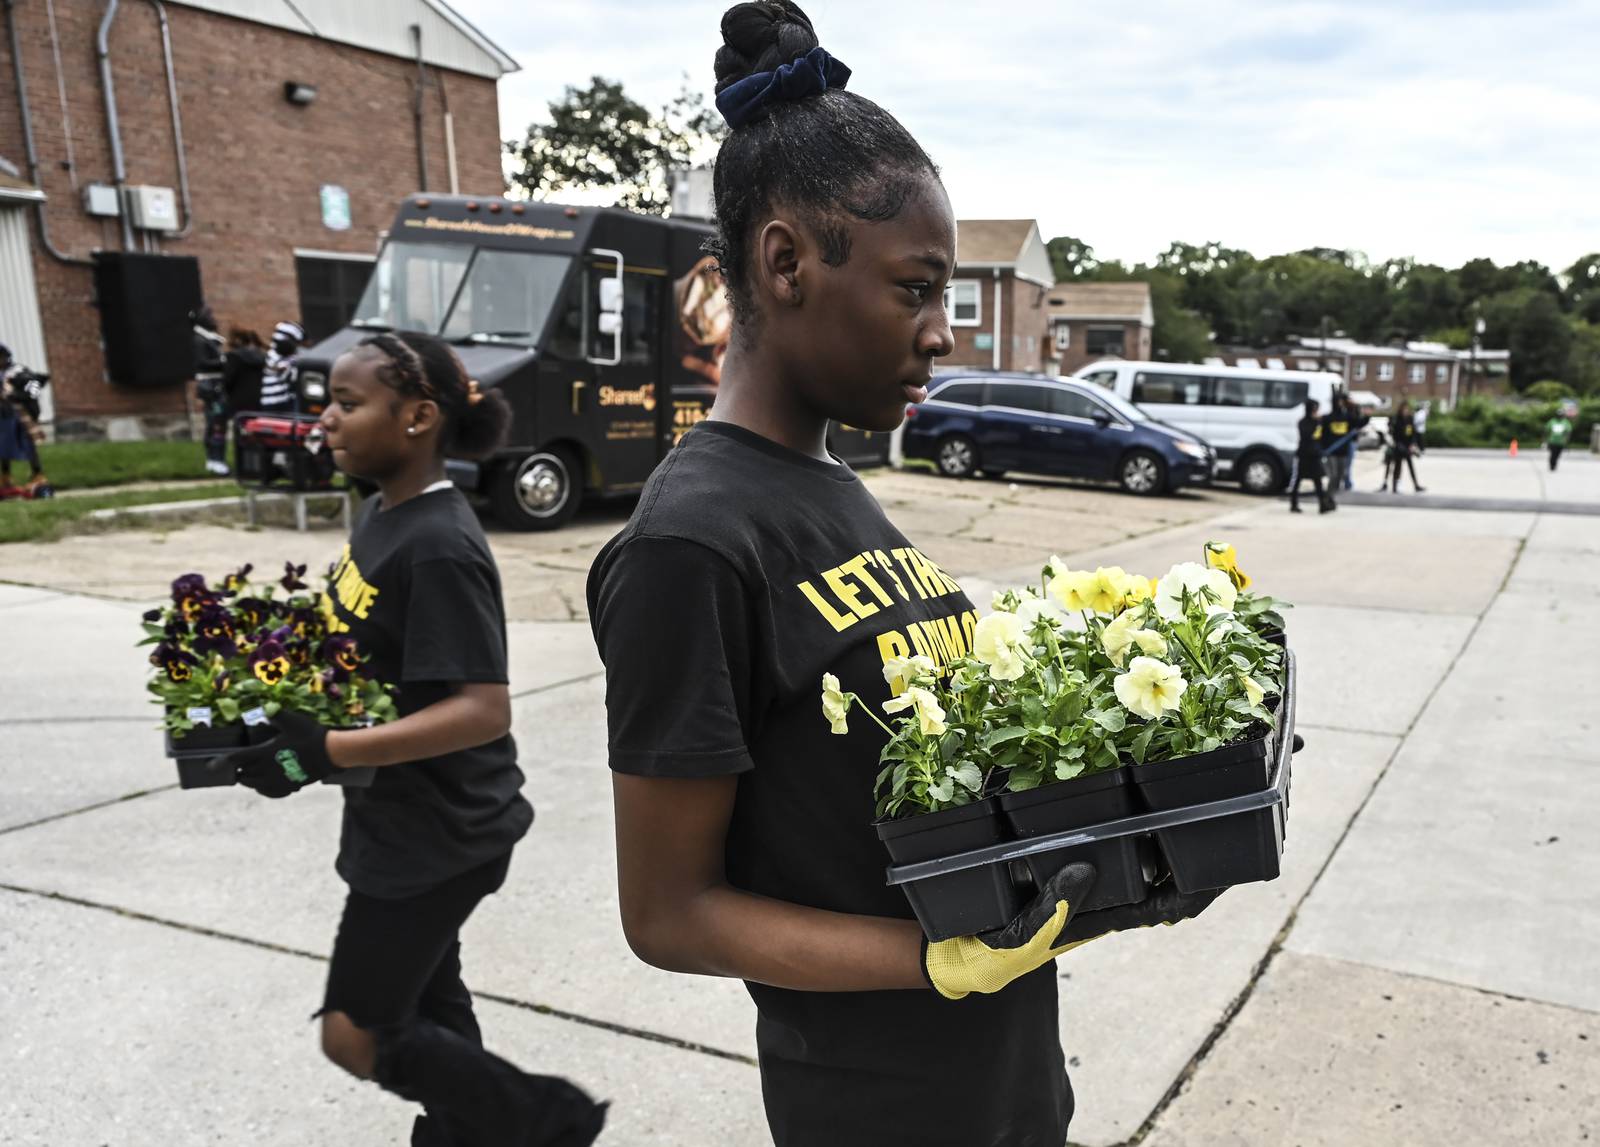 Youth volunteers deliver flowrs for new beds at the Brooklyn Homes' Healing Day event on Saturday